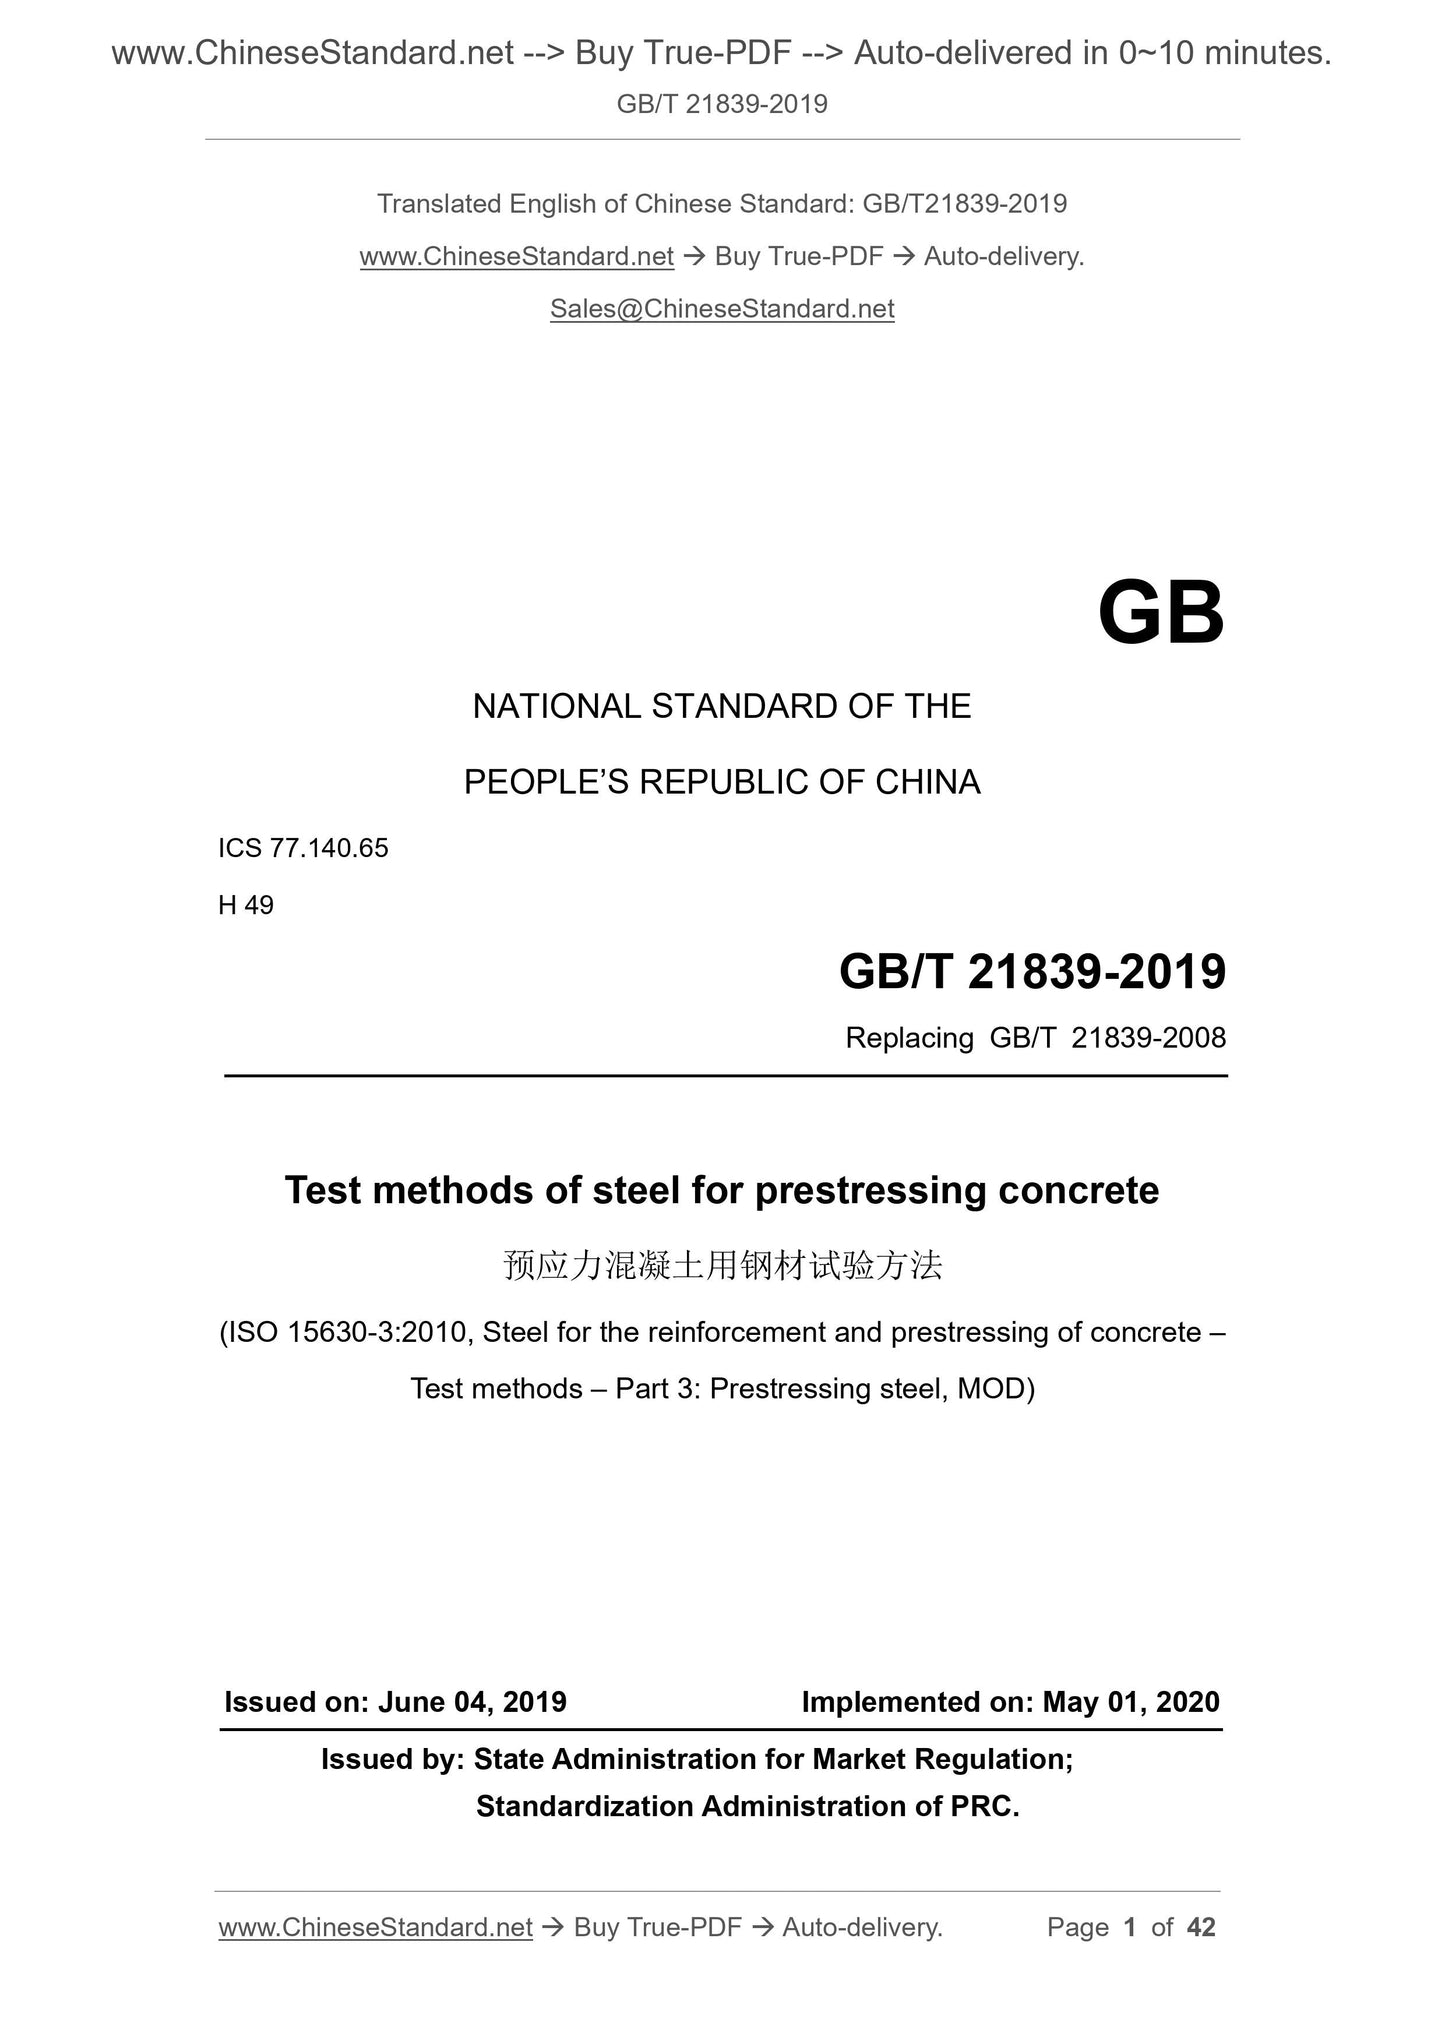 GB/T 21839-2019 Page 1